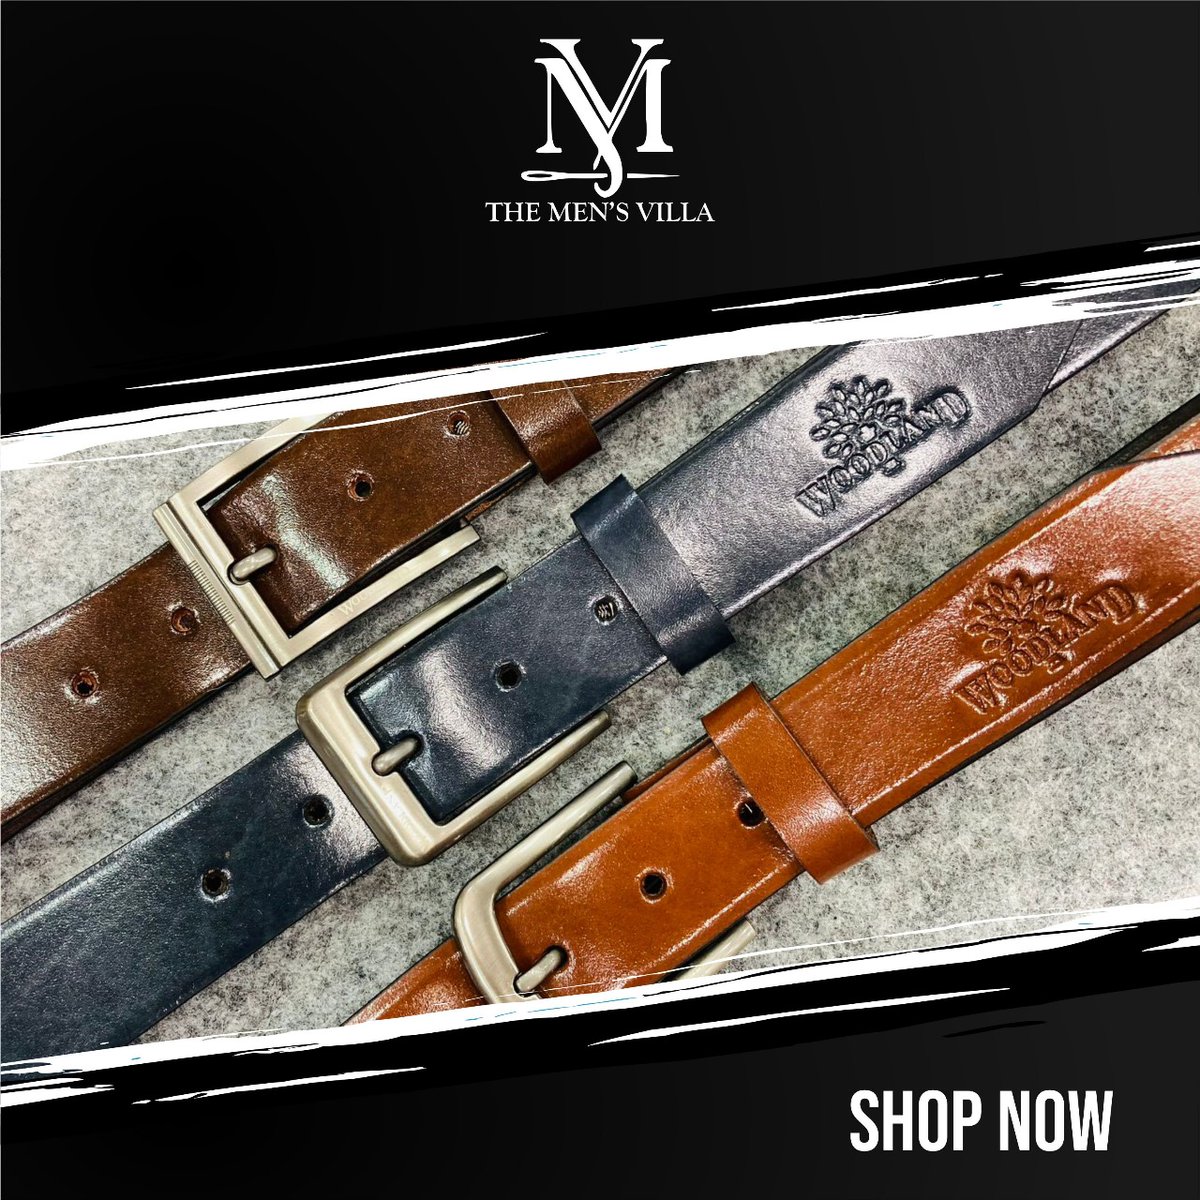 Looking for premium men's belts that combine unparalleled quality and style? Look no further than The Mens Villa. Explore our collection and find the perfect accessory to complete your outfit with class. 

#mensbelt #fashion #brandedproducts #highquality #mensaccessories